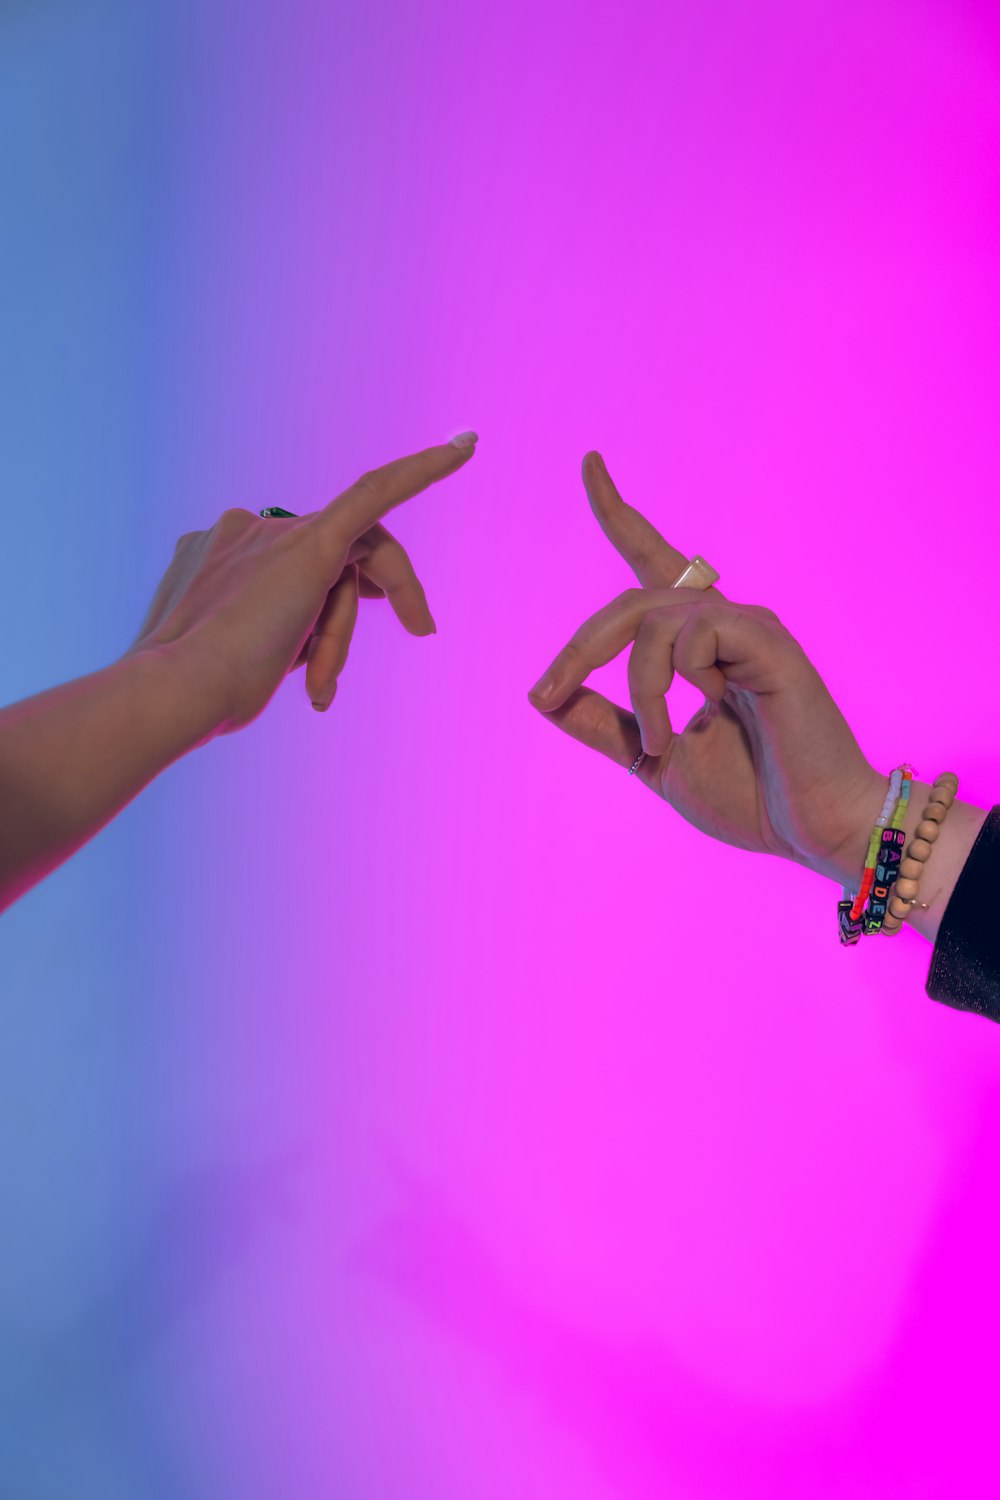 two hands reaching towards each other in front of a pink and blue background